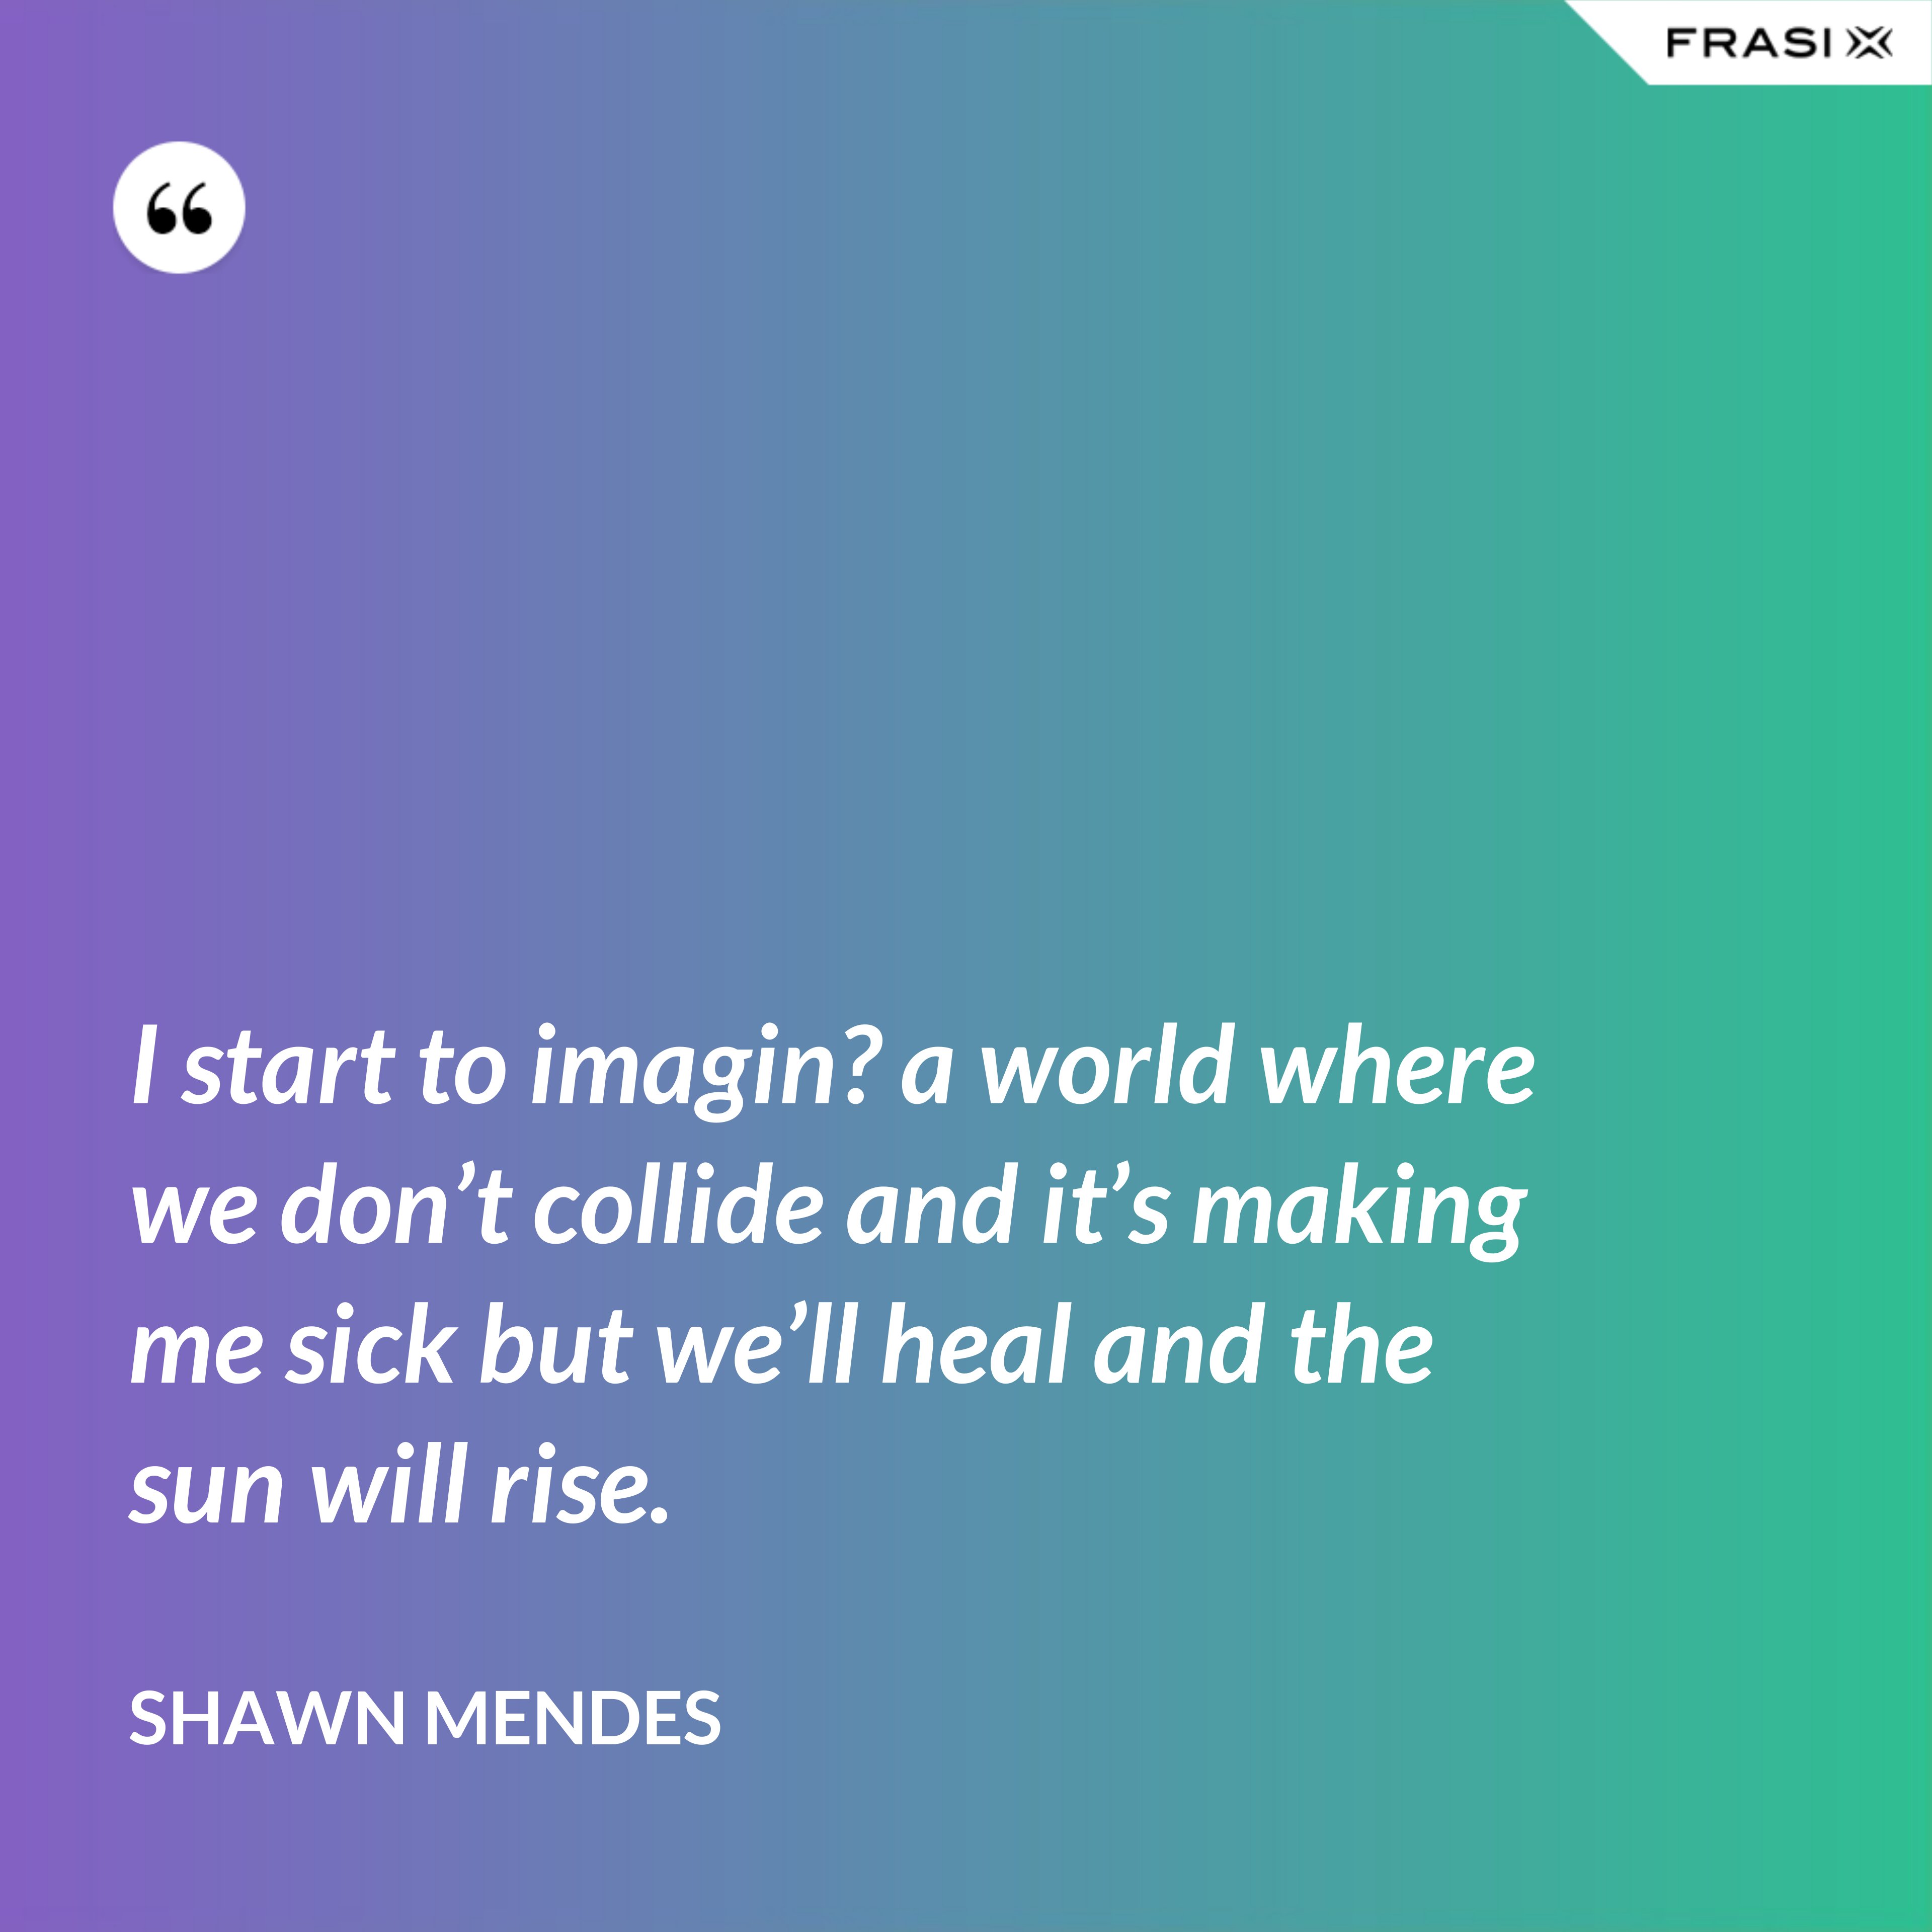 I start to imagin? a world where we don’t collide and it’s making me sick but we’ll heal and the sun will rise. - Shawn Mendes